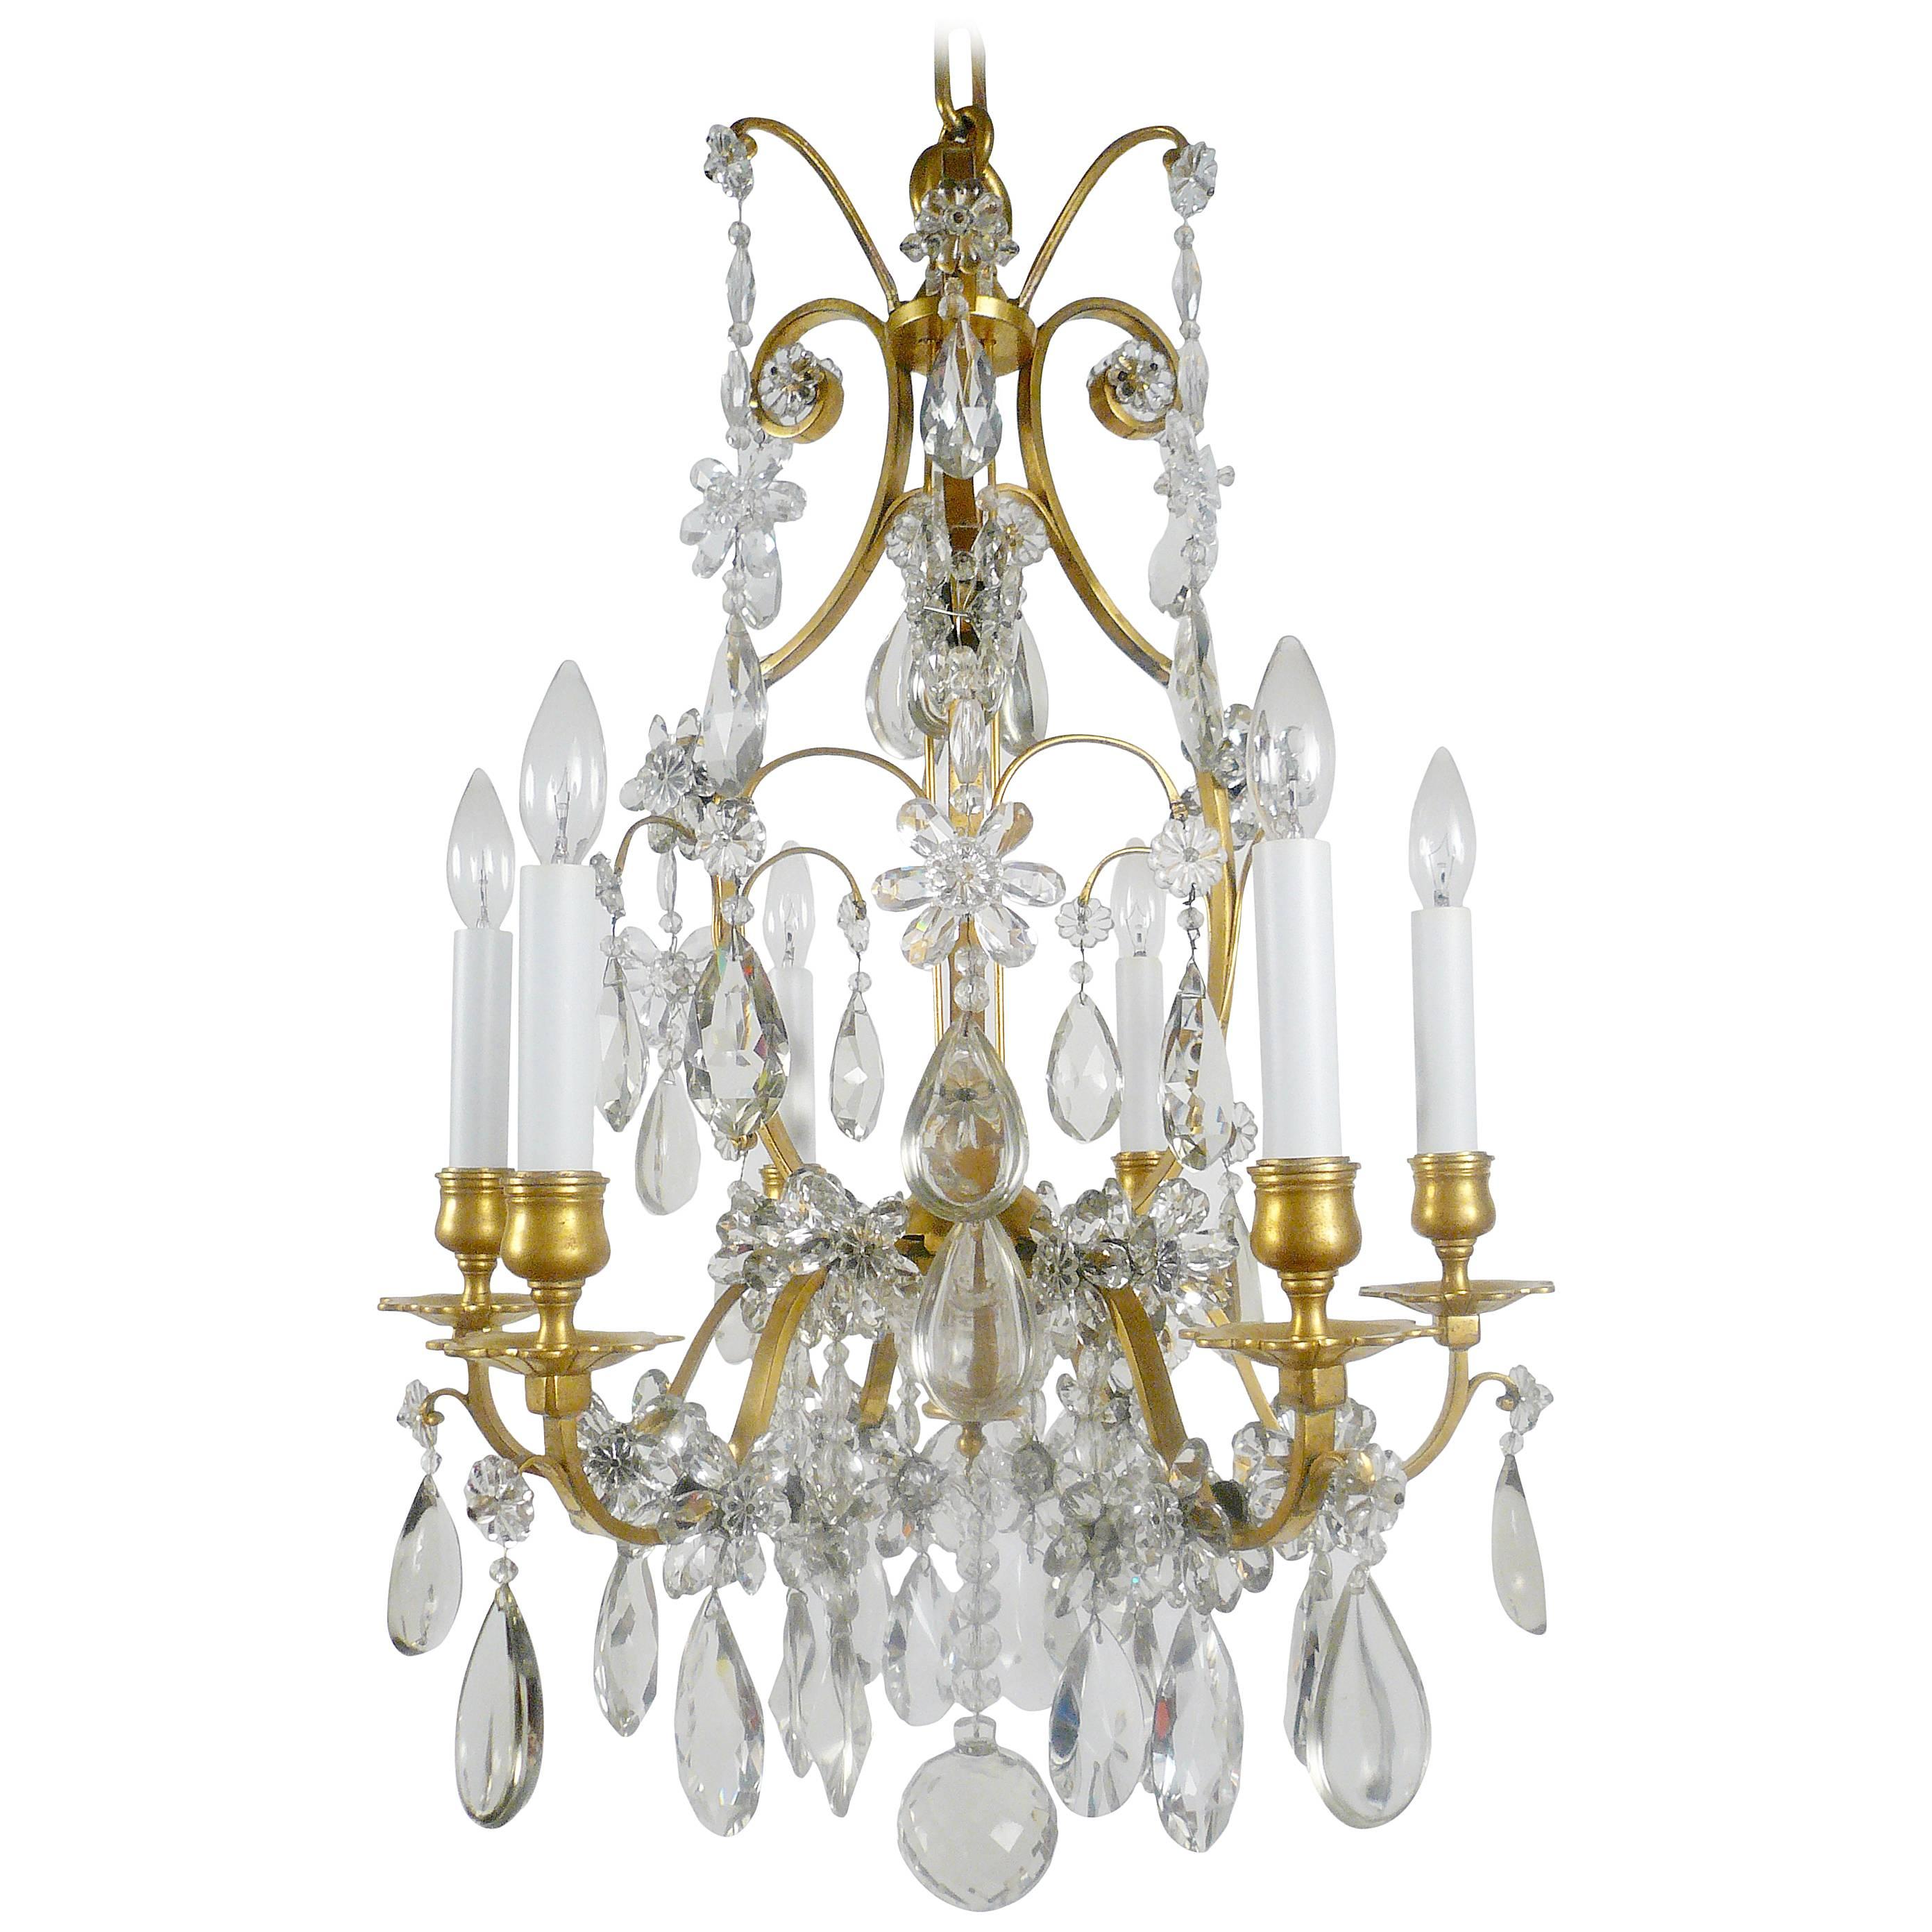 Louis XVI Style Gilt Bronze and Crystal Six-Light Chandelier